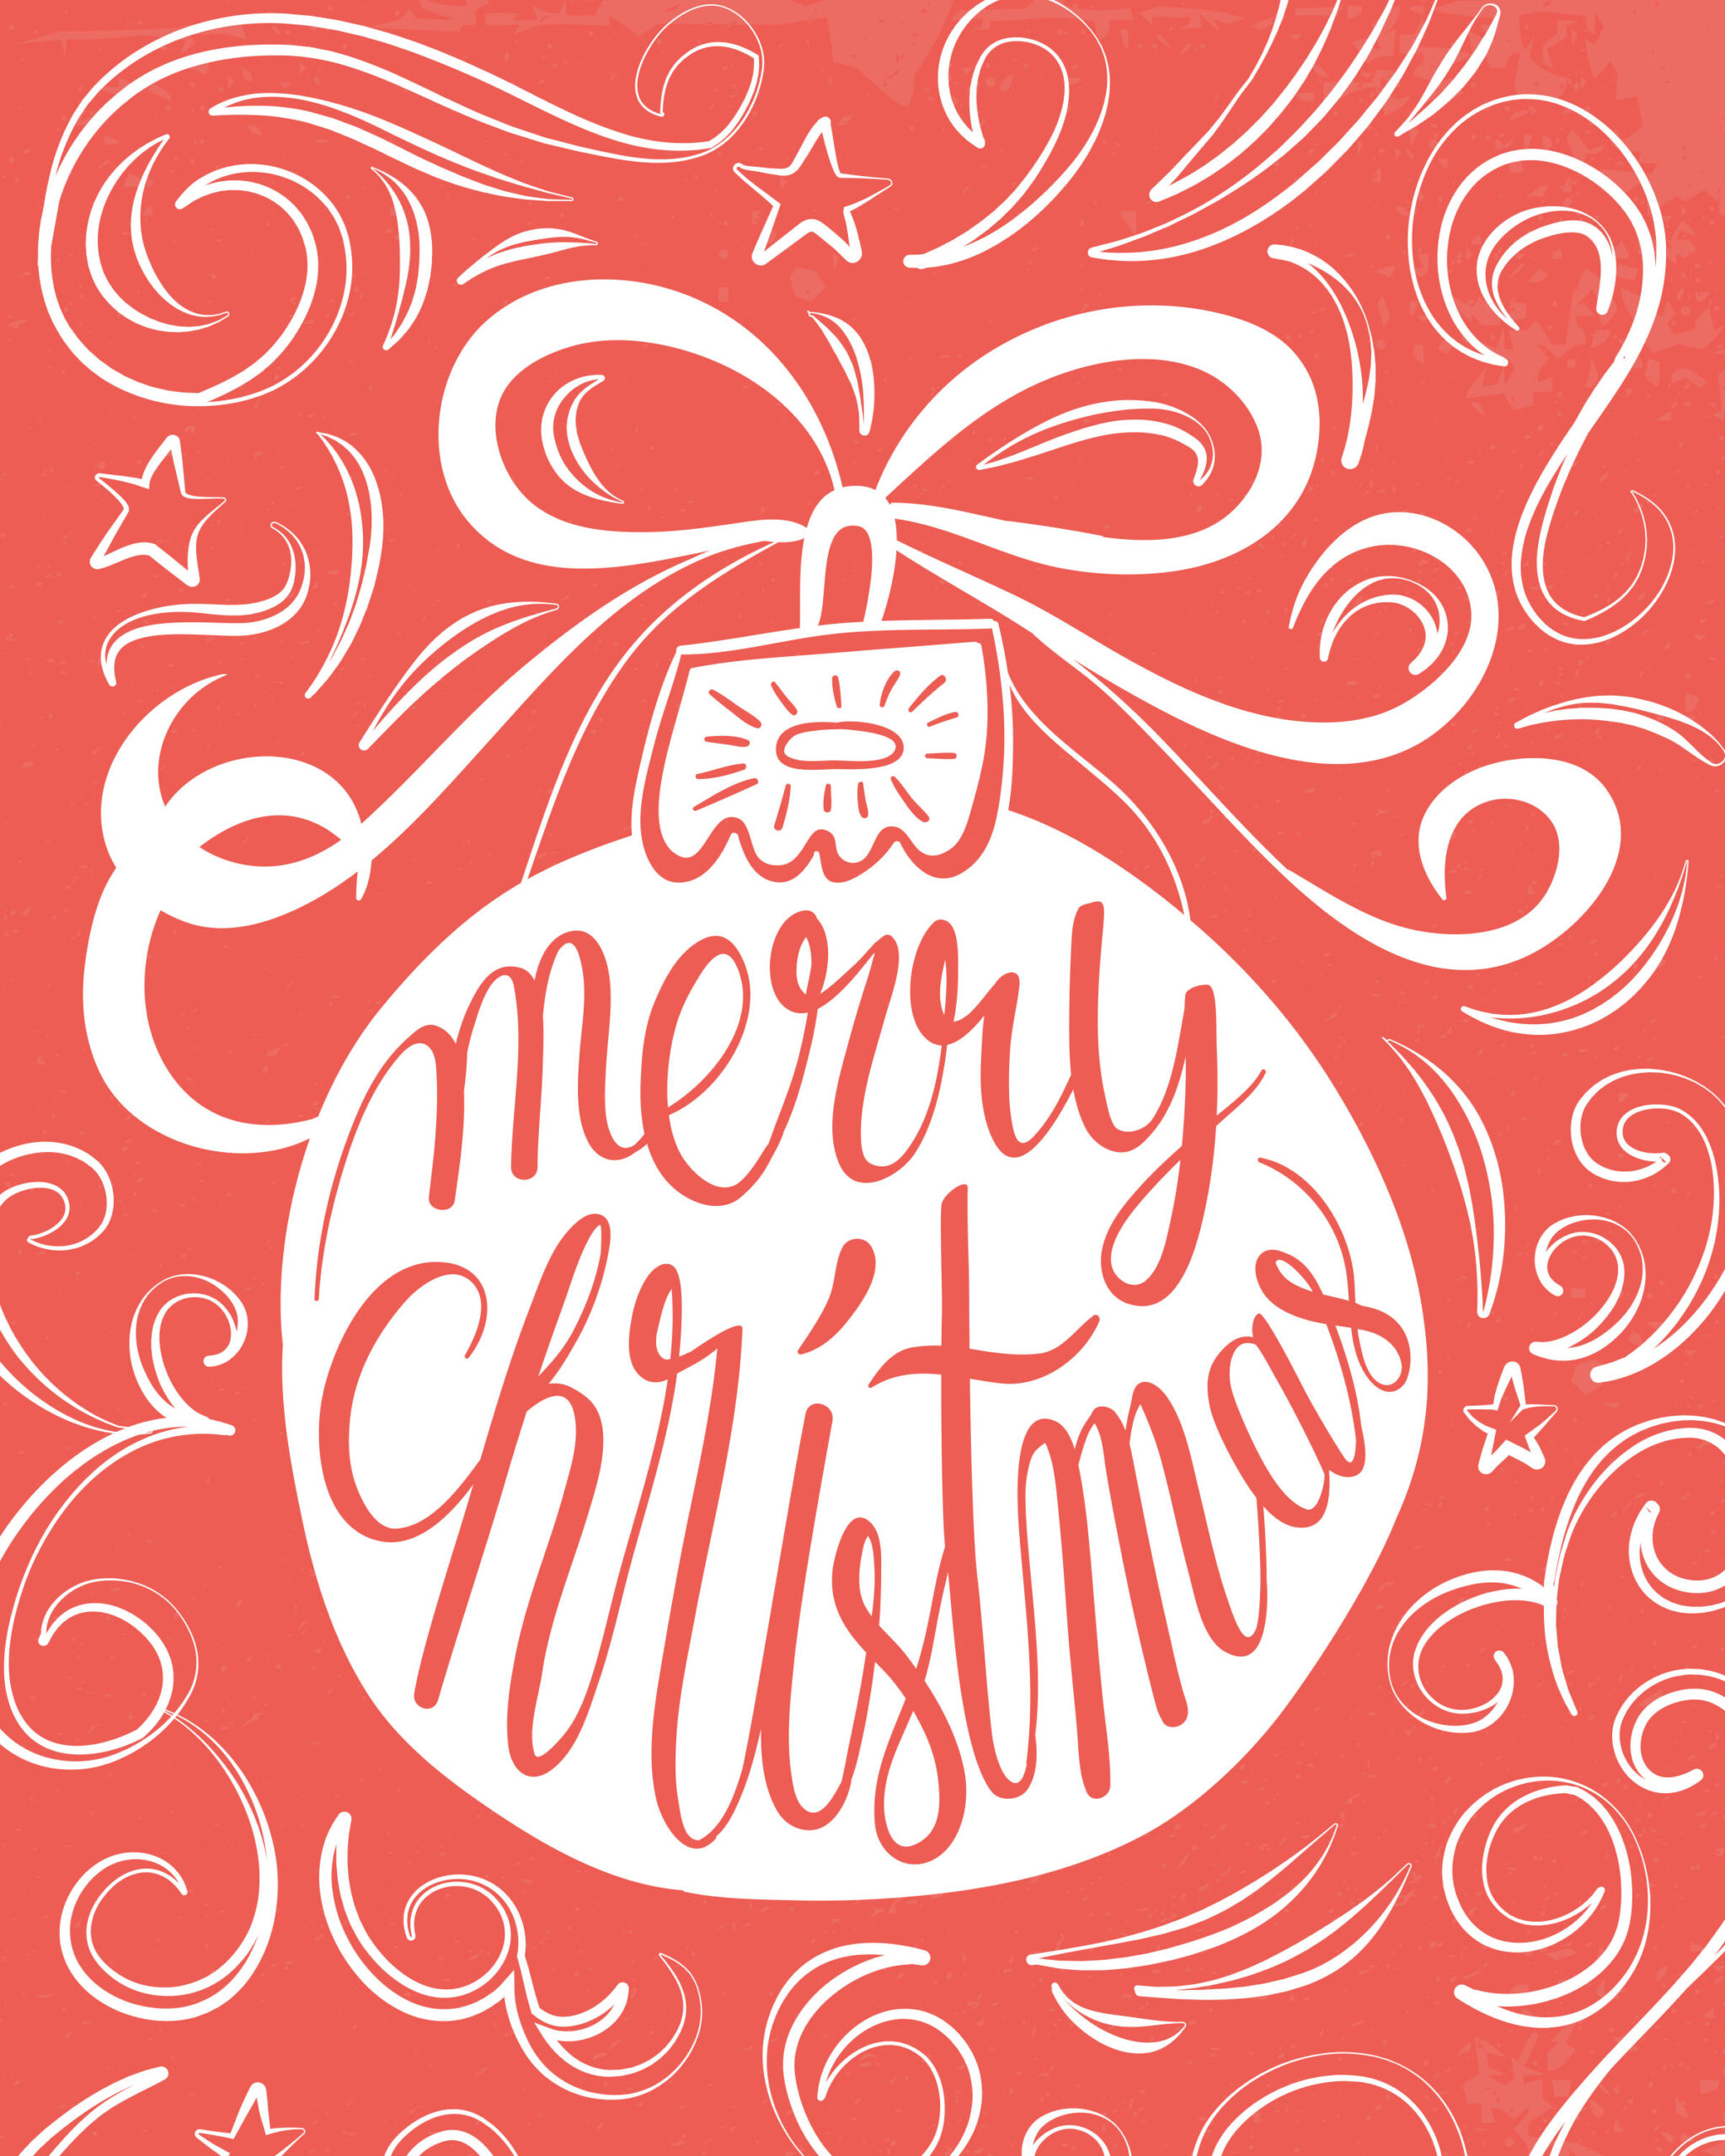 Free Printable Christmas Picture